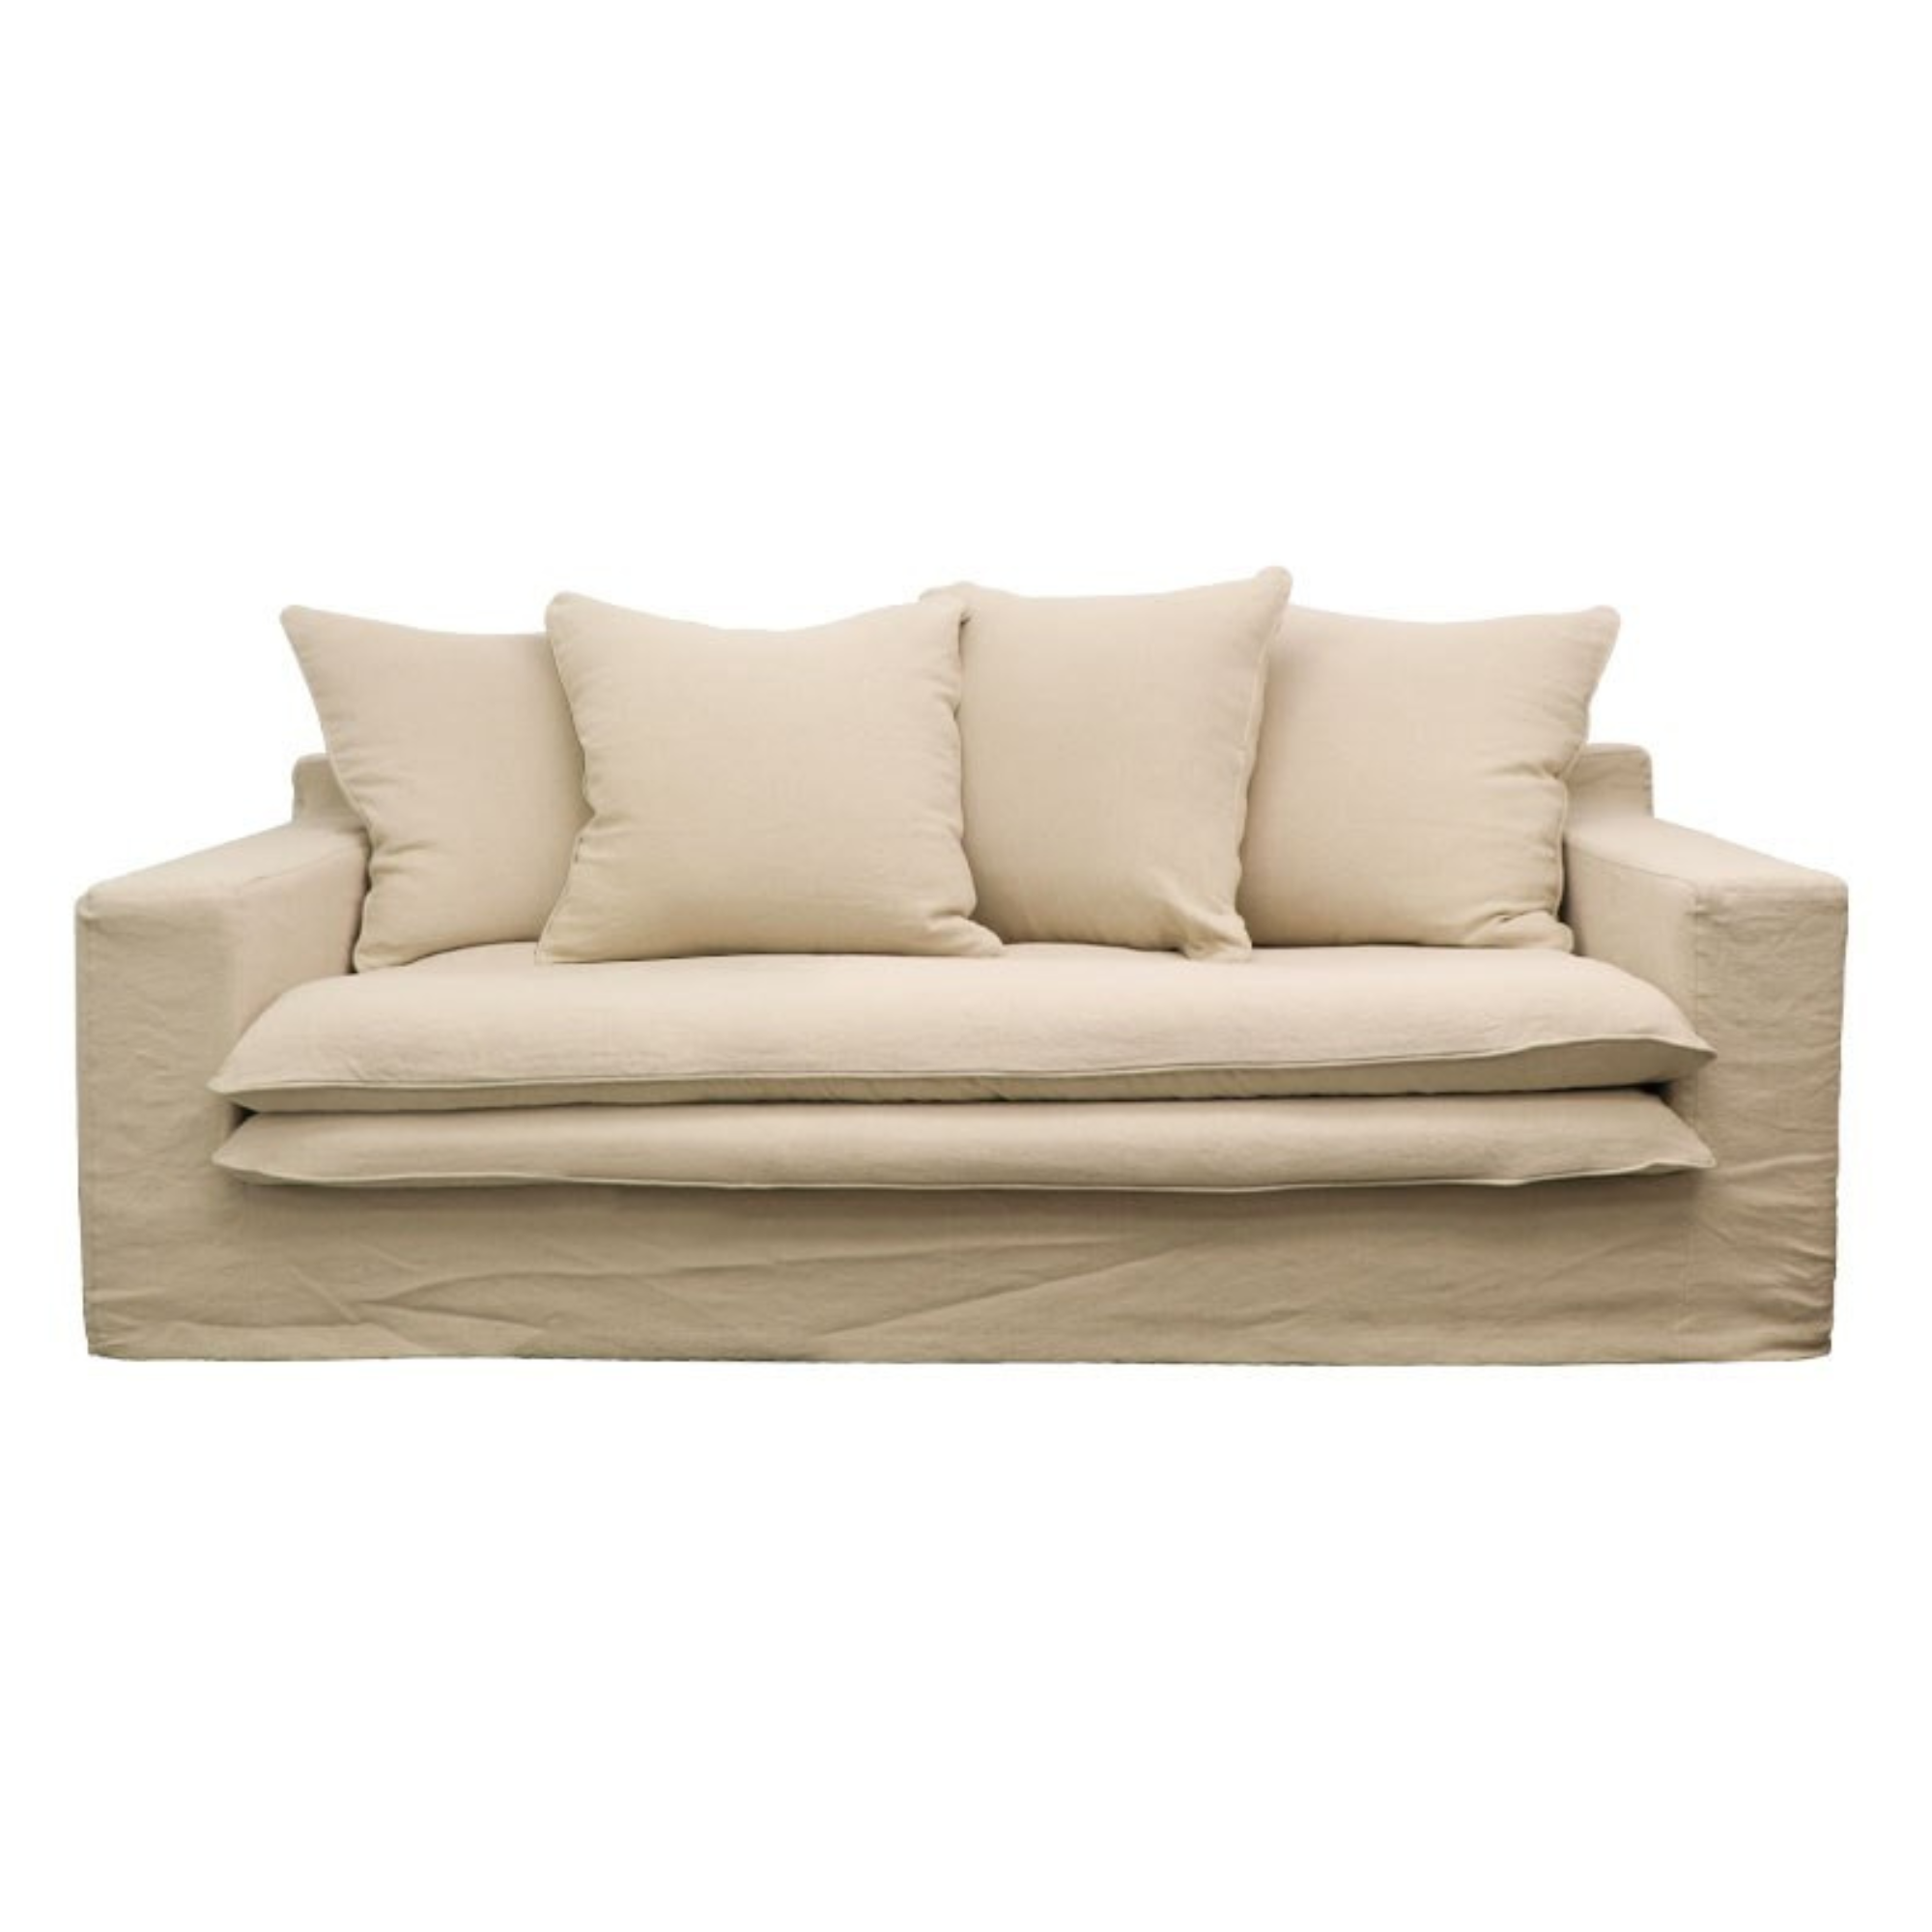 KEELY SLIPCOVER 2 SEATER SOFA | 5 COLOURS